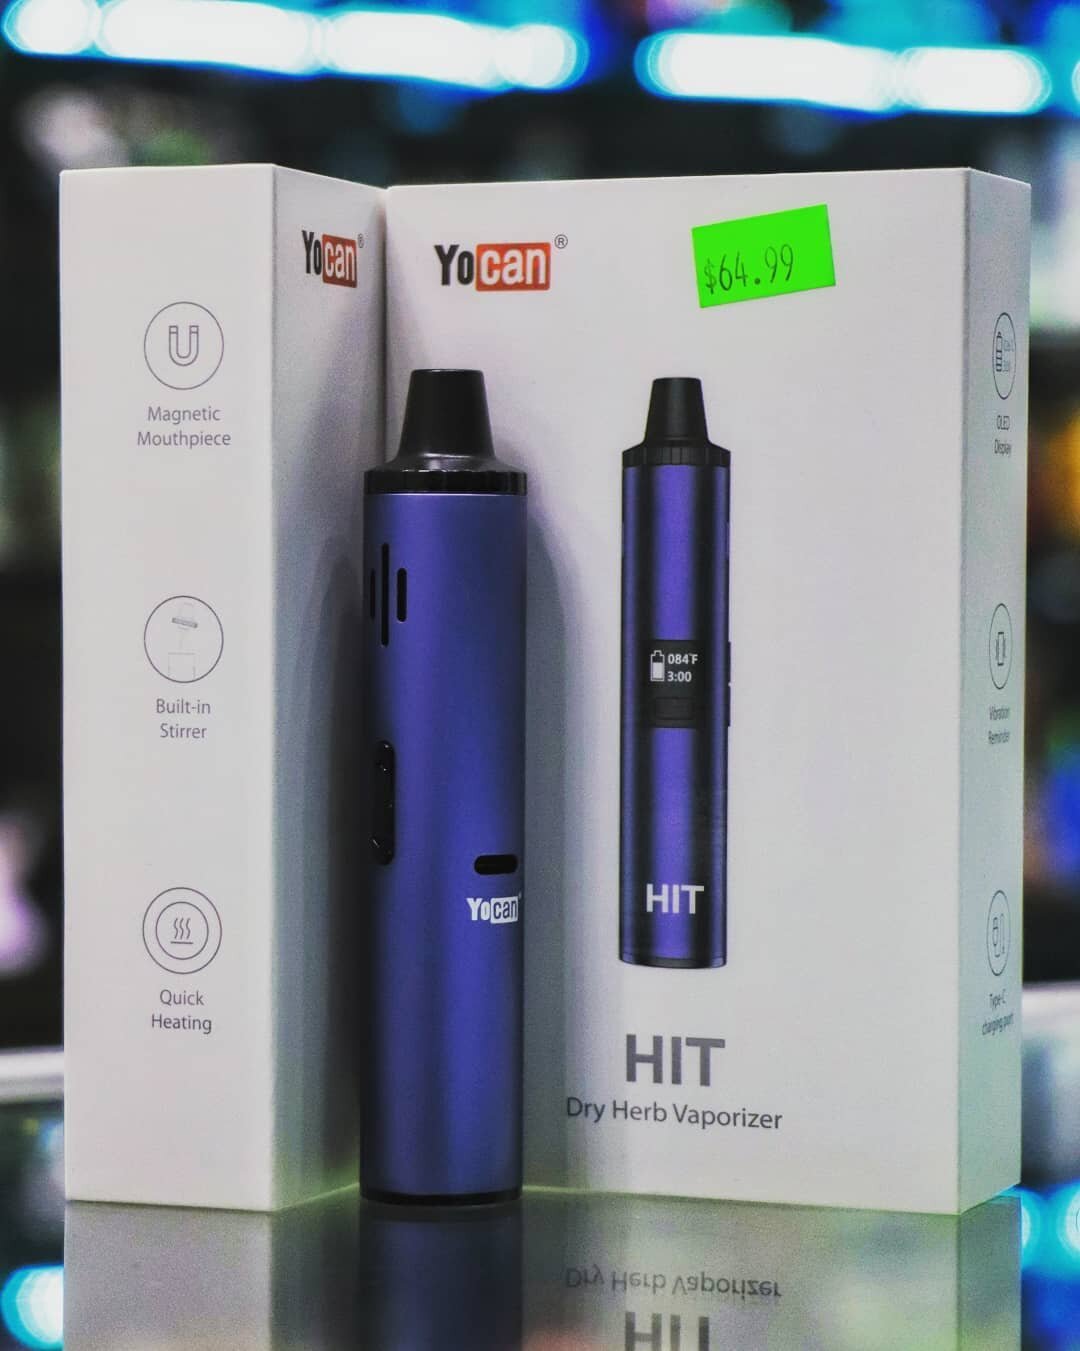 NEW DRY HERB VAPORIZER: The Hit by @yocantech

This robust little beast offers a great bang for your buck. Boasting a fully ceramic heating chamber, built-in stirrer, and sturdy magnetic mouthpiece, the Hit is a great all-around companion for your he